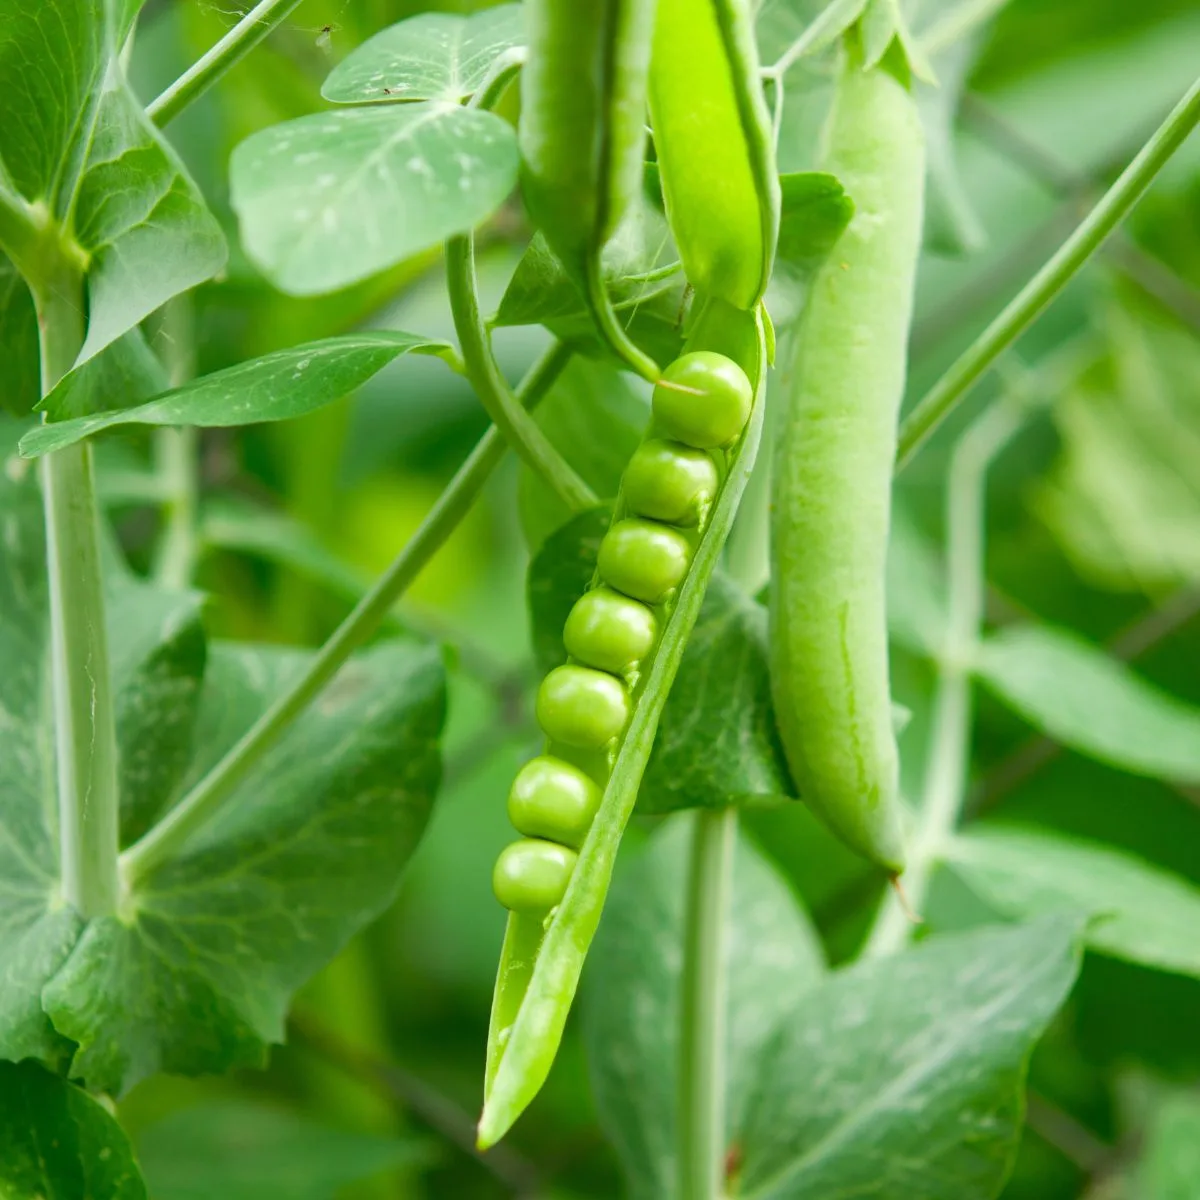 Mature peas, ready to be harvested.